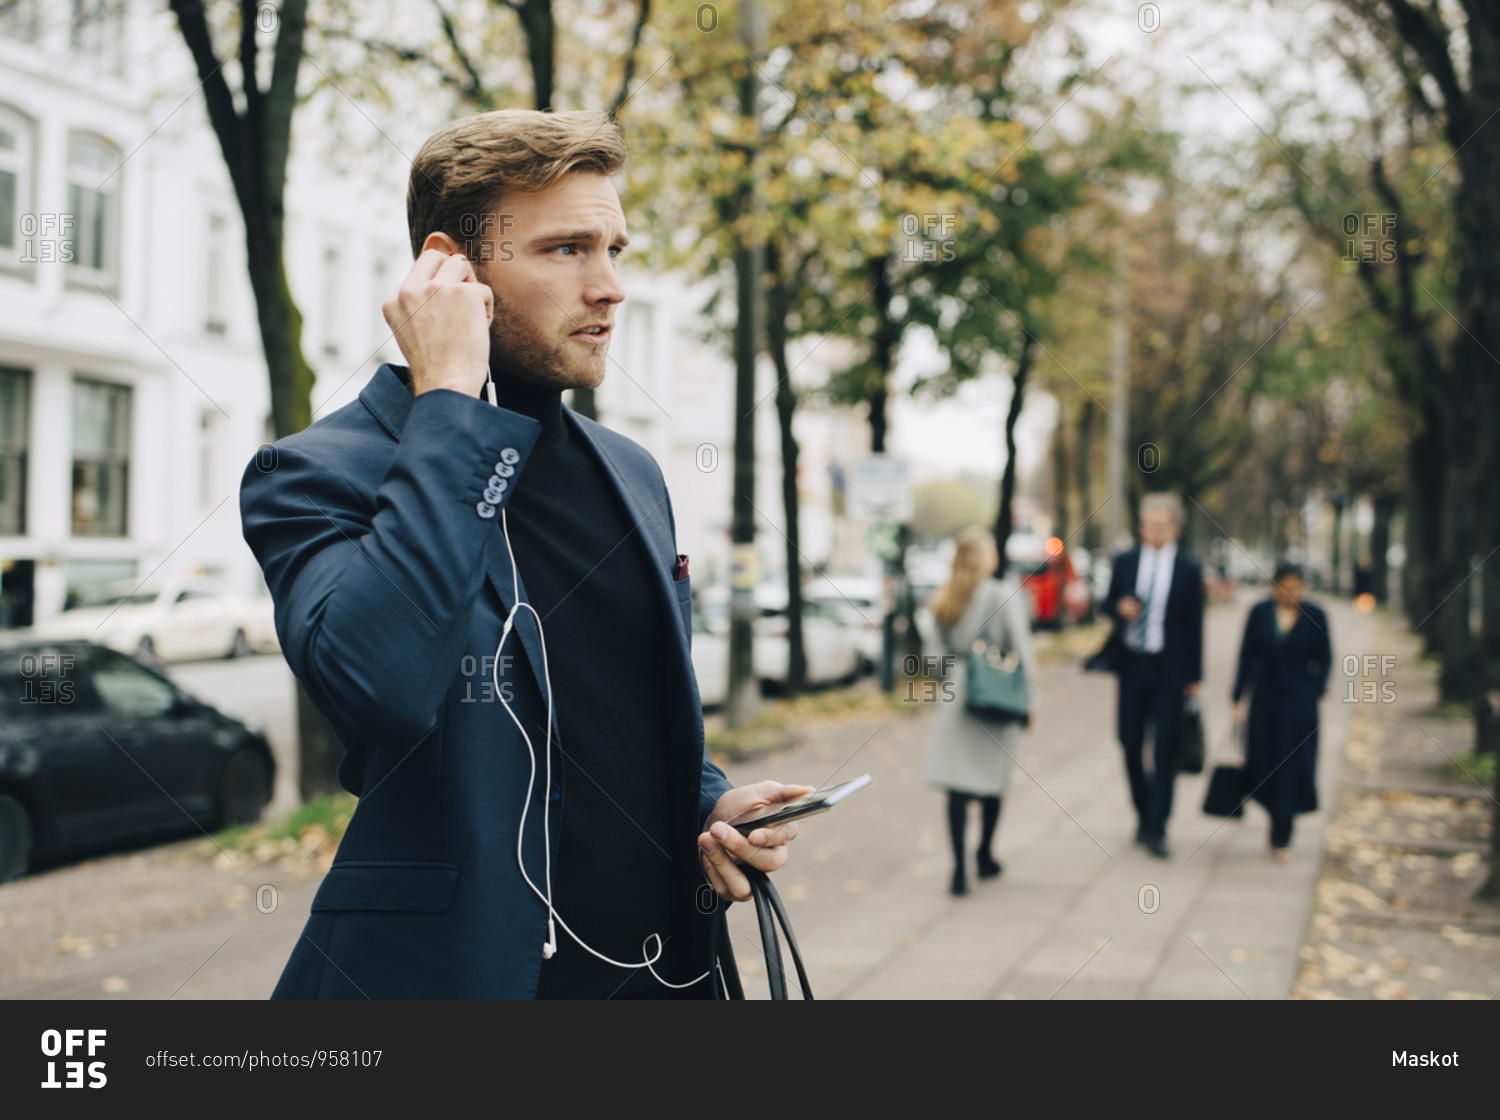 Businessman looking away while holding in-ear headphones in city